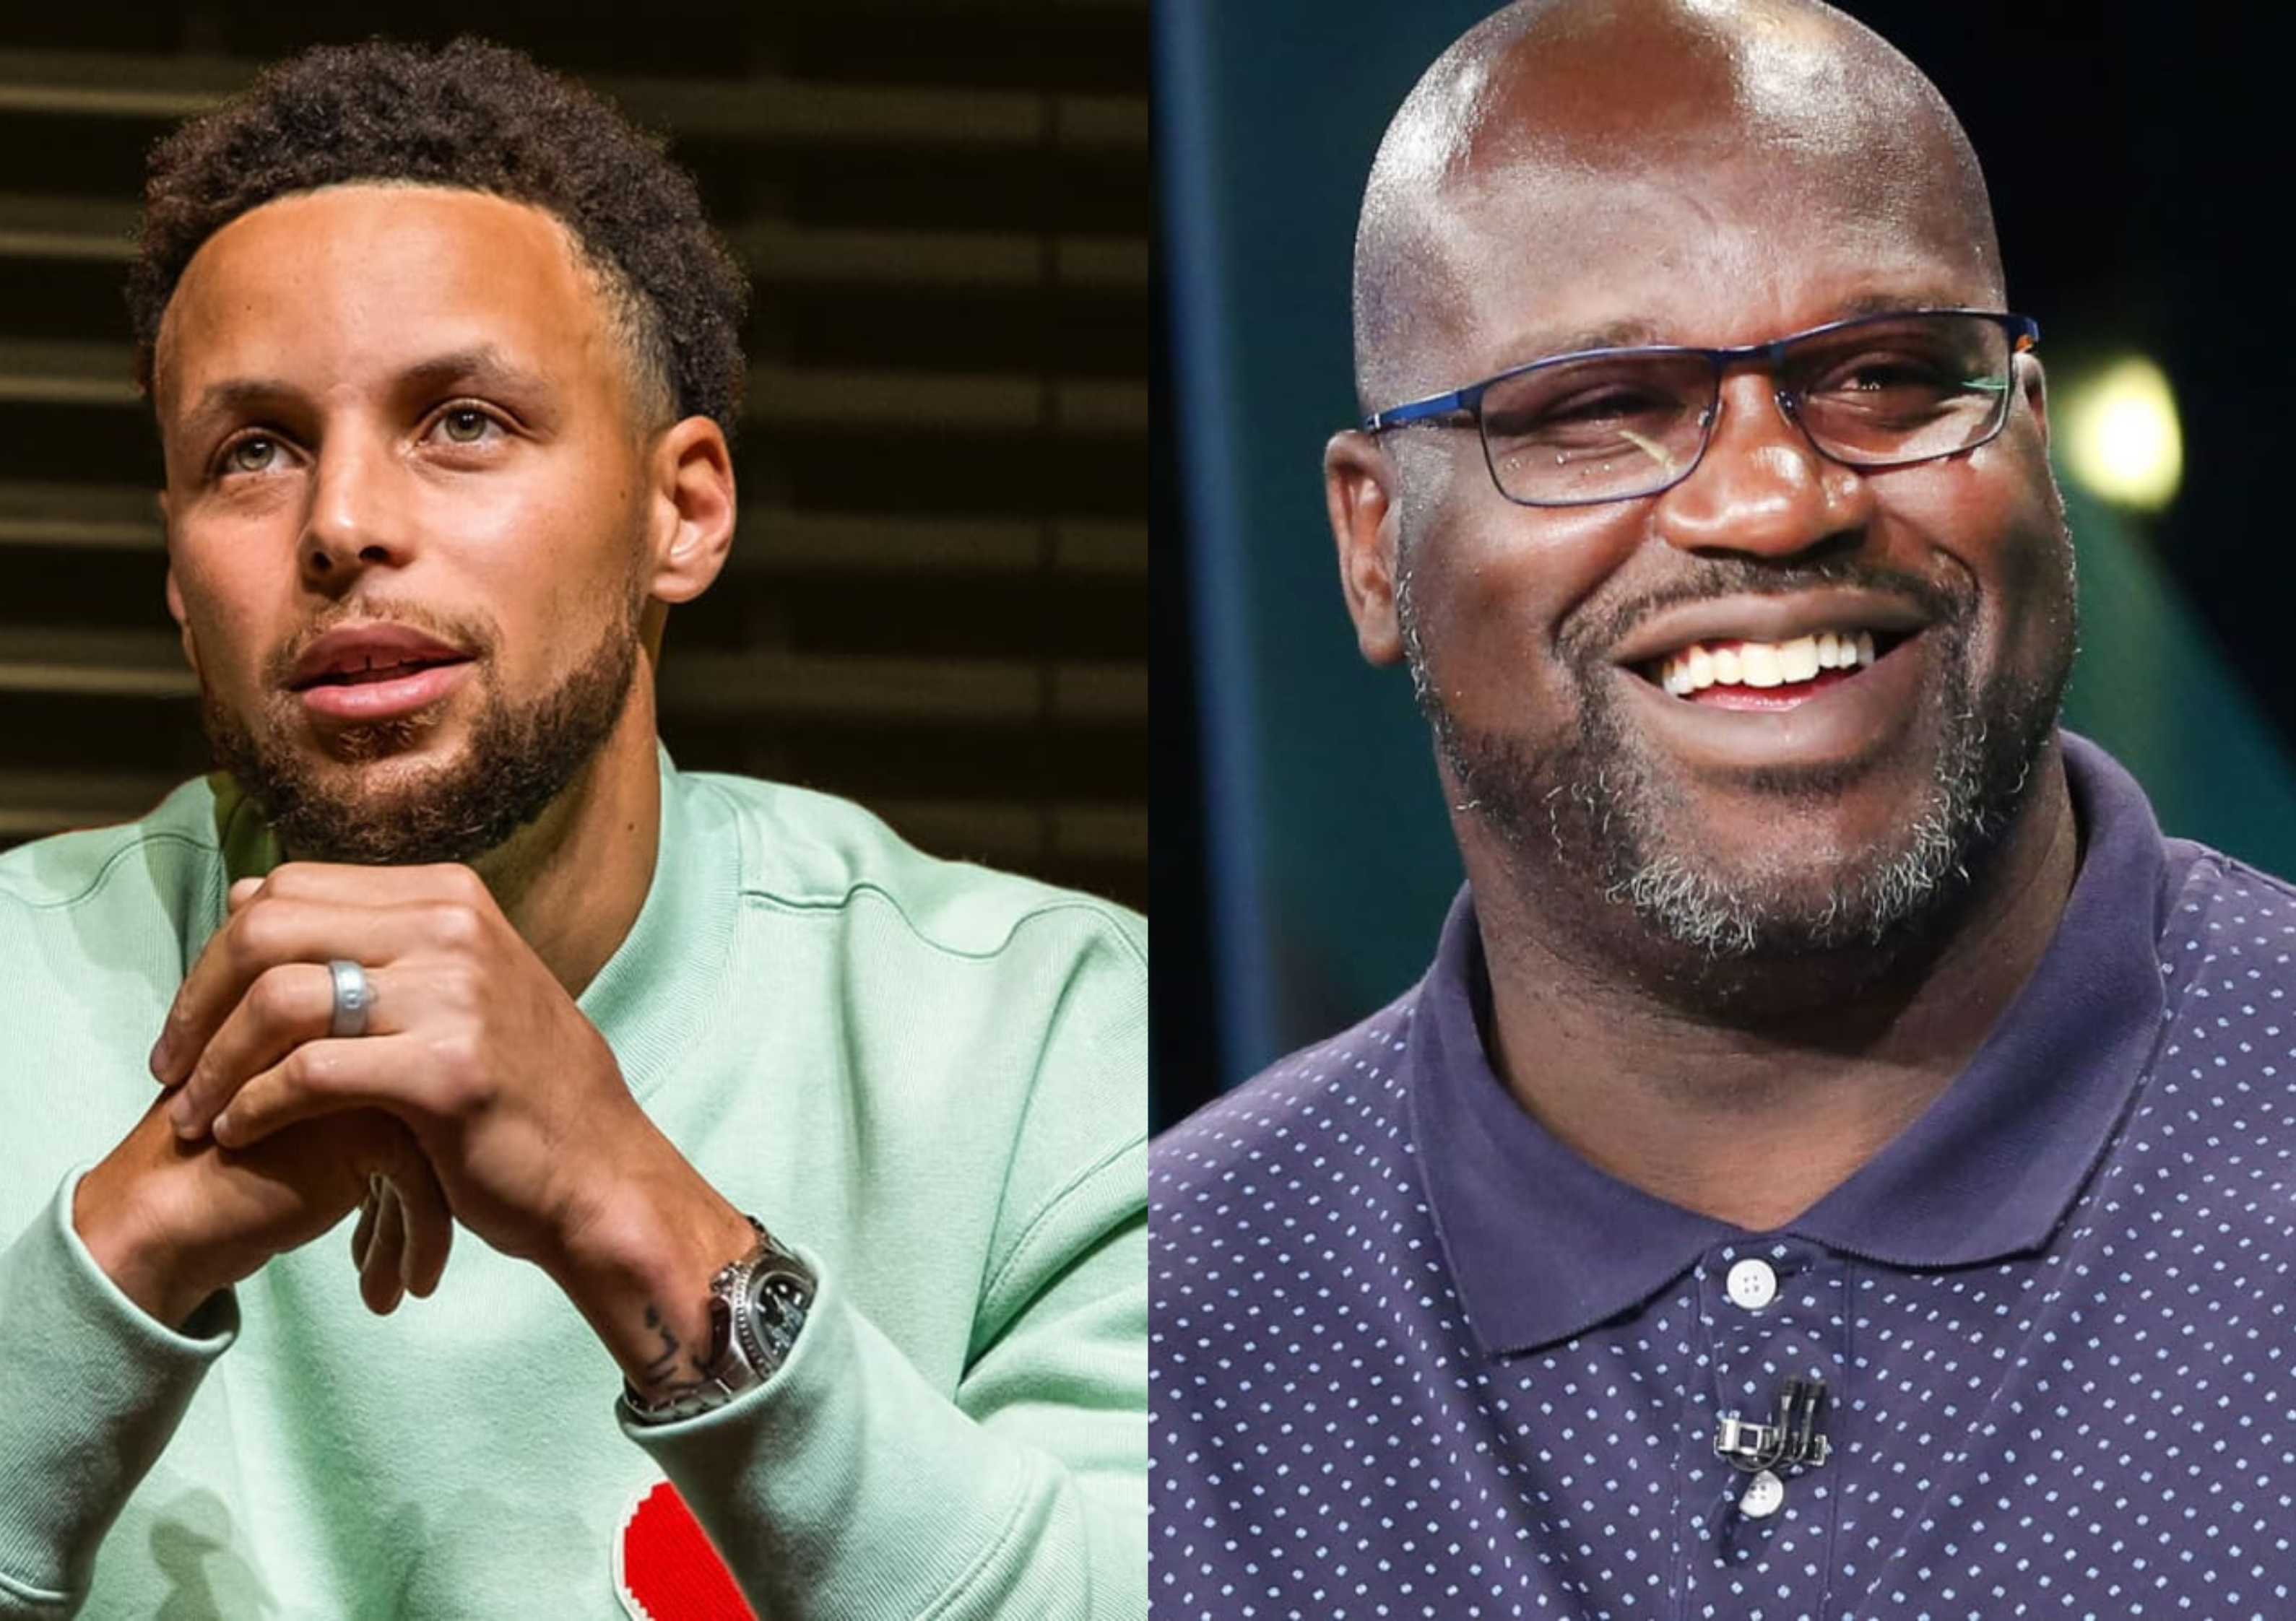 Stephen Curry Teams With Shaquille O'Neal for Lusia 'Lucy' Harris Documentary